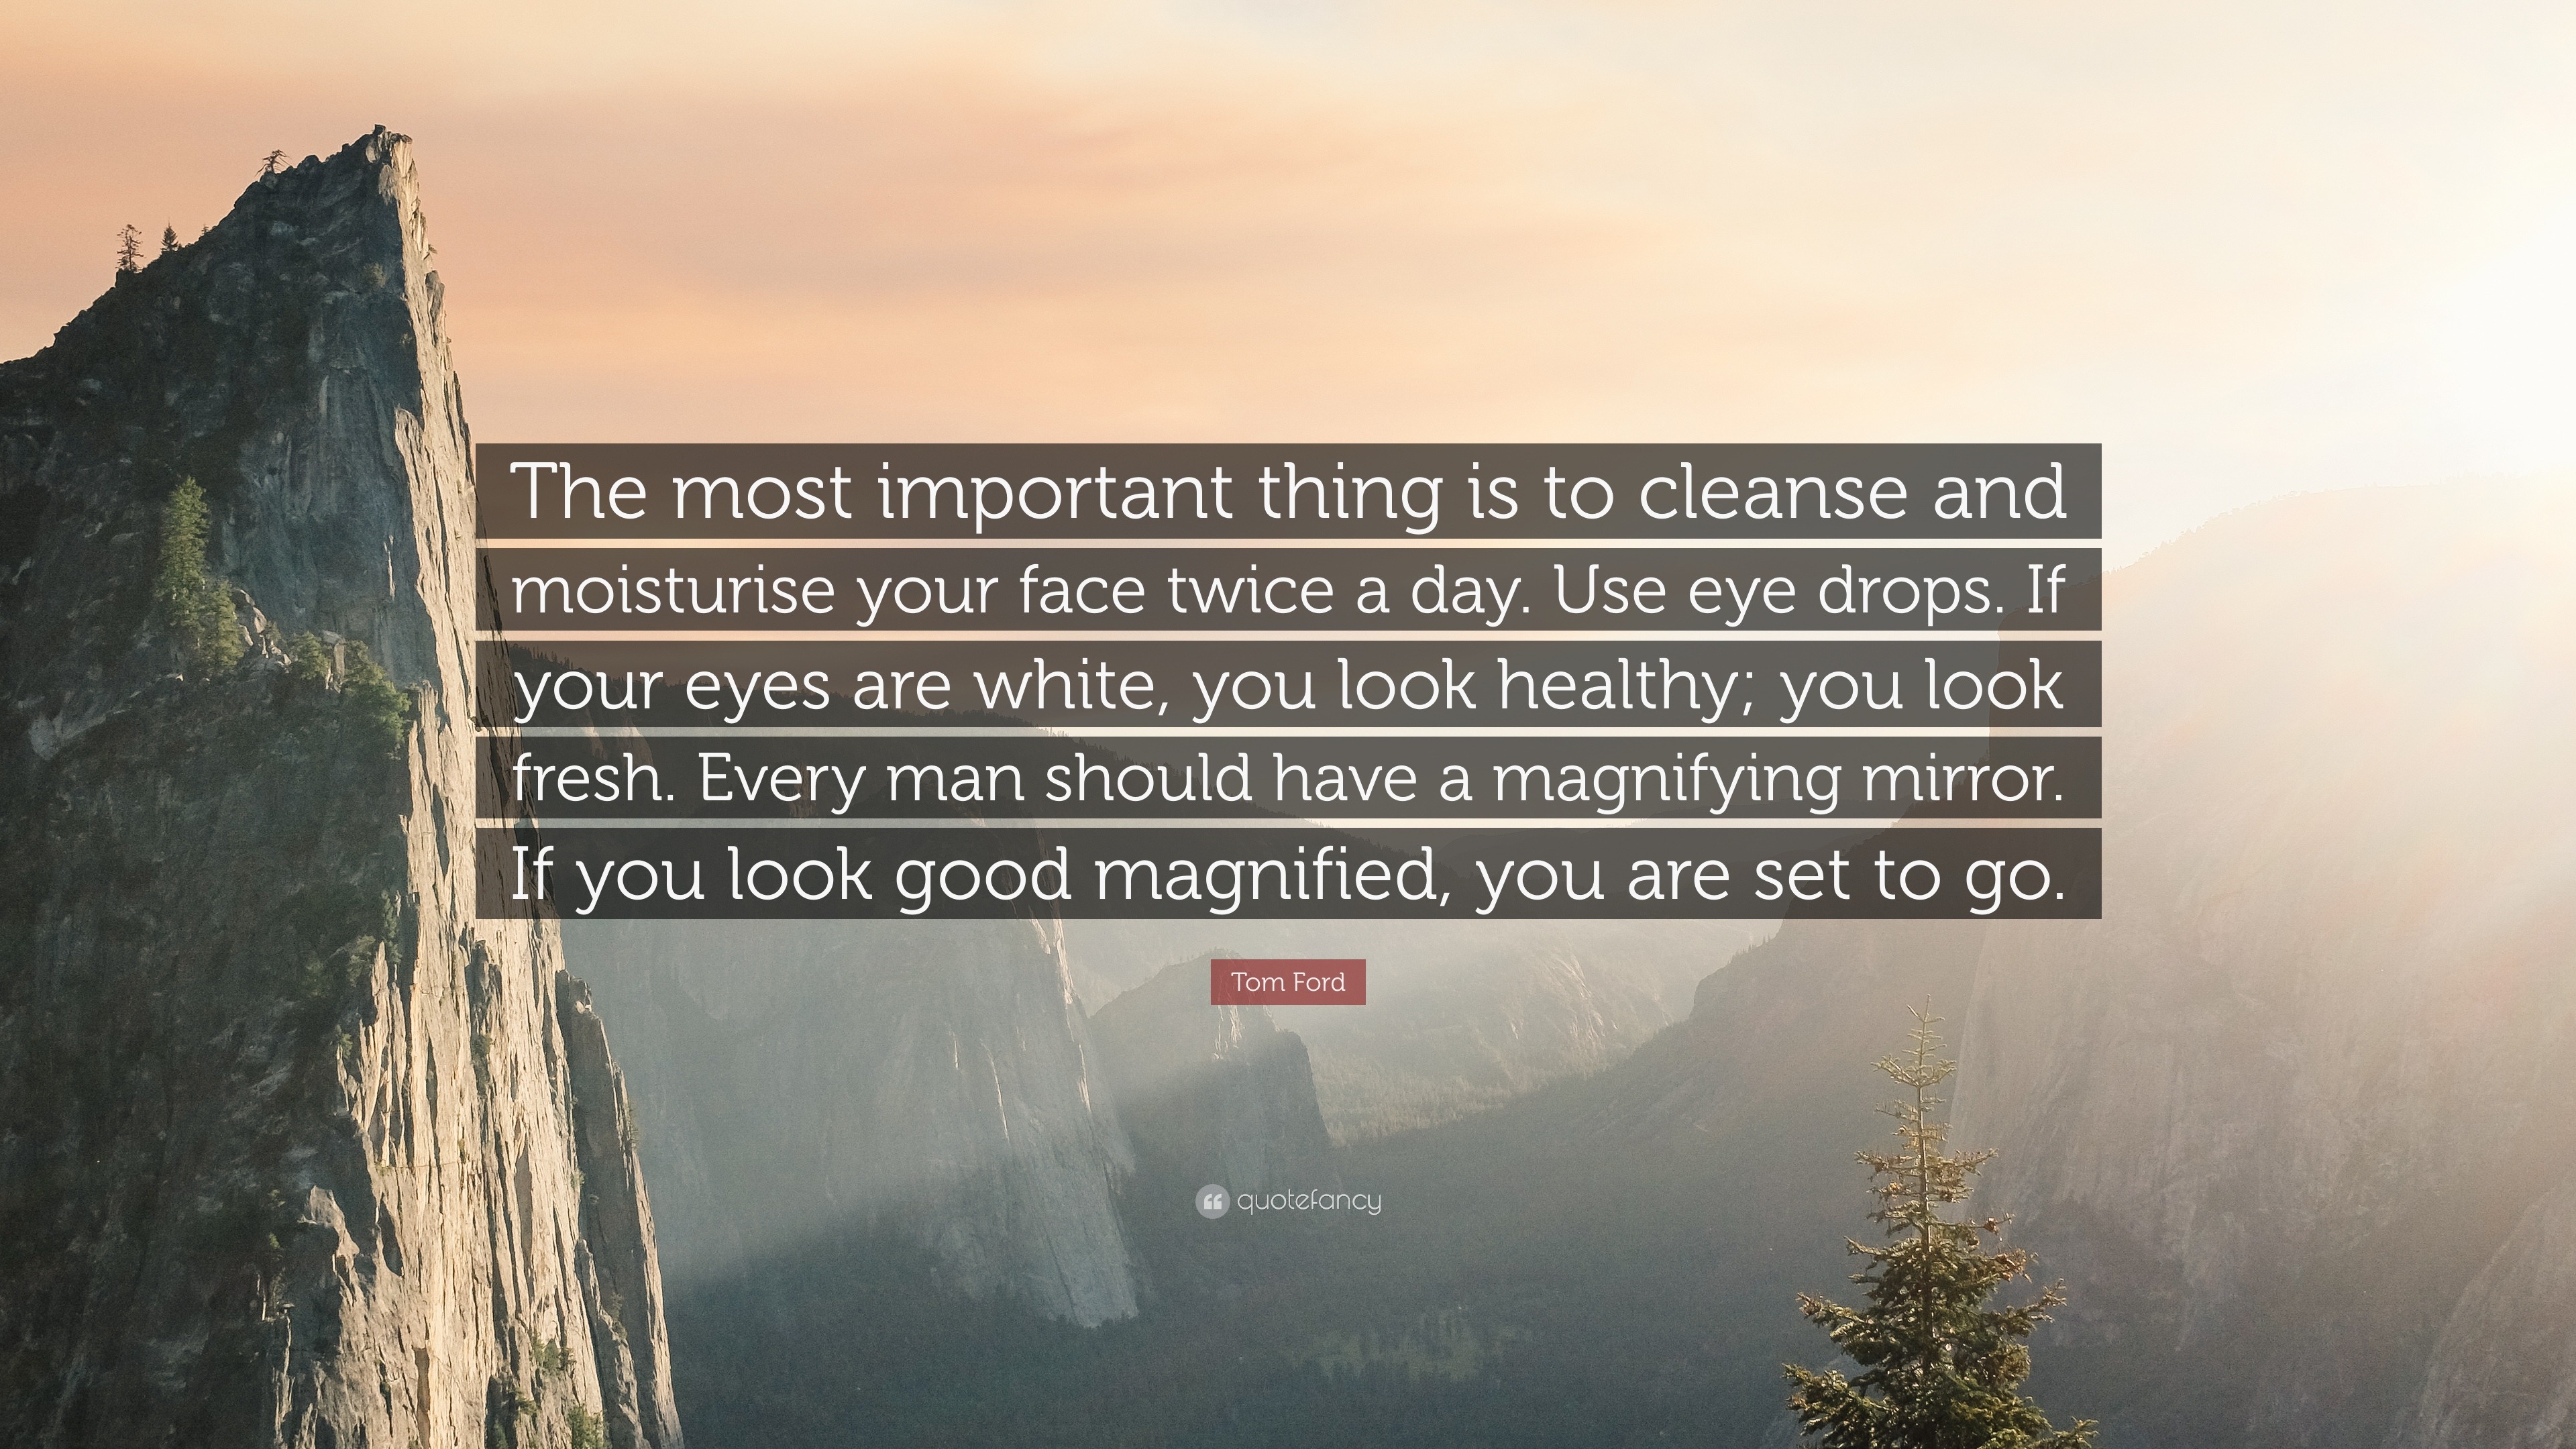 Tom Ford Quote: “The most important thing is to cleanse and moisturise your  face twice a day. Use eye drops. If your eyes are white, you ...”